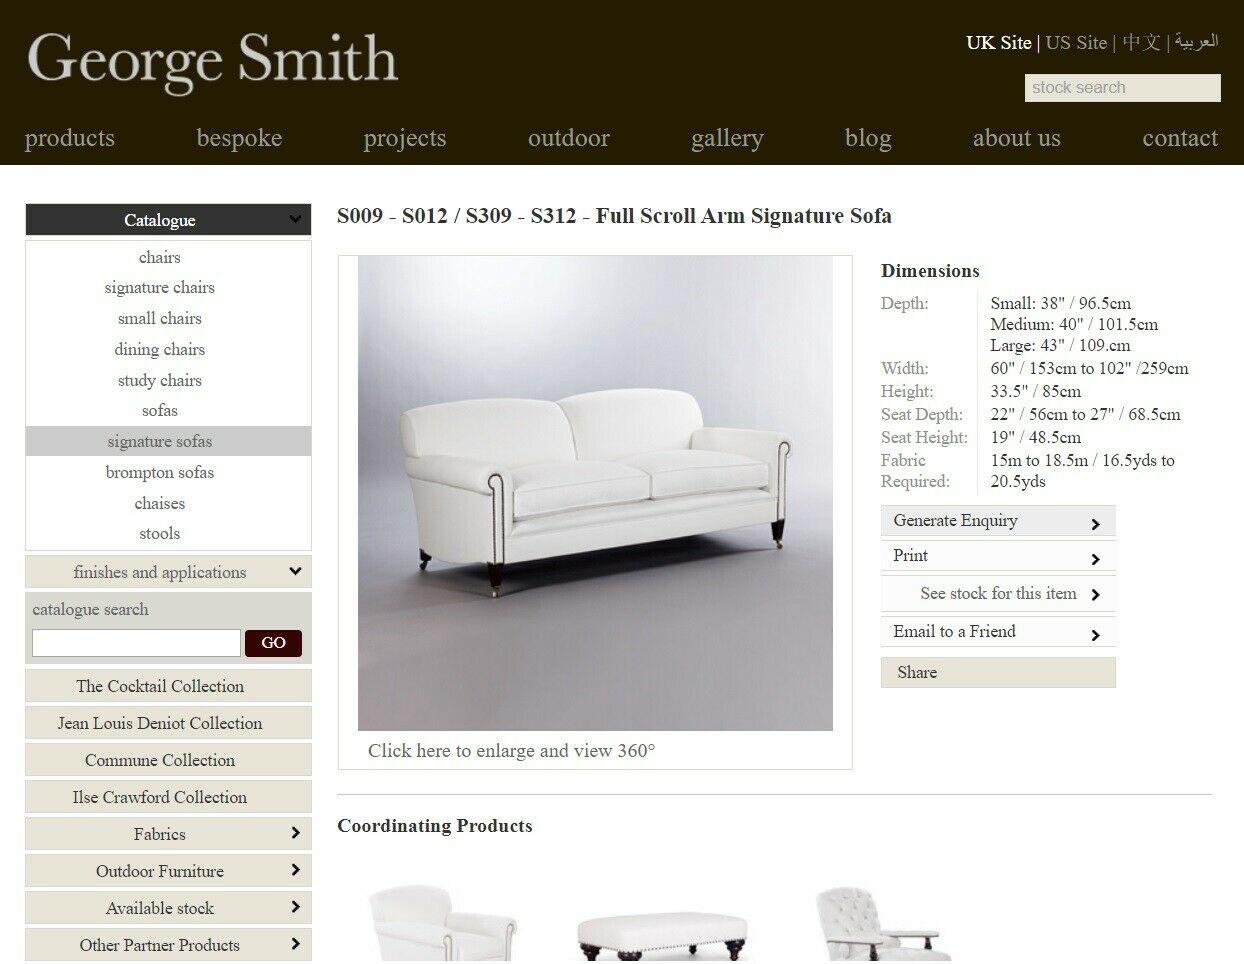 We are delighted to offer this lovely full sized George Smith full scroll arm signature sofa RRP £10,500.

George Smith Chelsea make some of the finest hand made in England sofas based on traditional English designs.

The sofa is made from beech